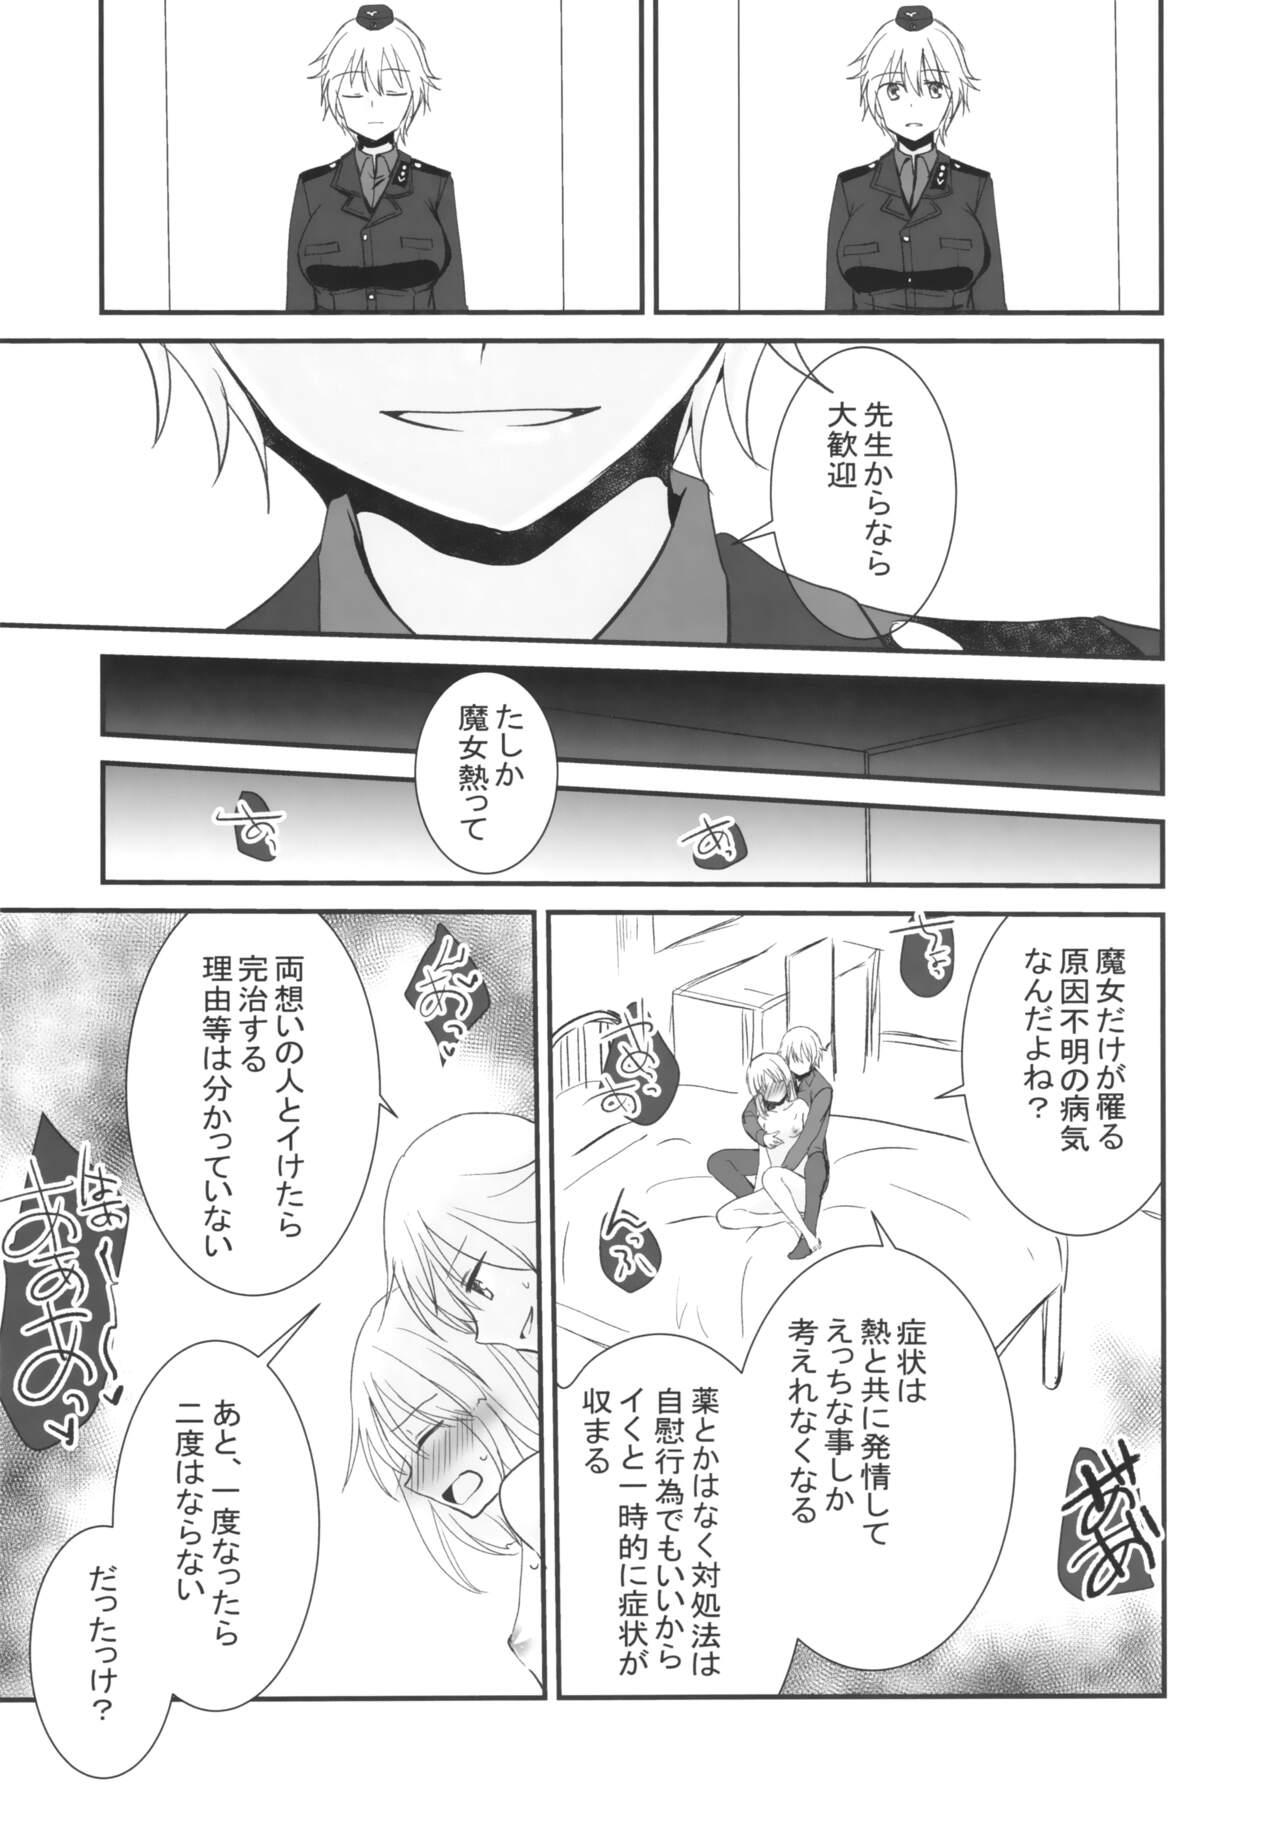 Straight Porn Soushisouai - Brave witches Gozo - Page 9